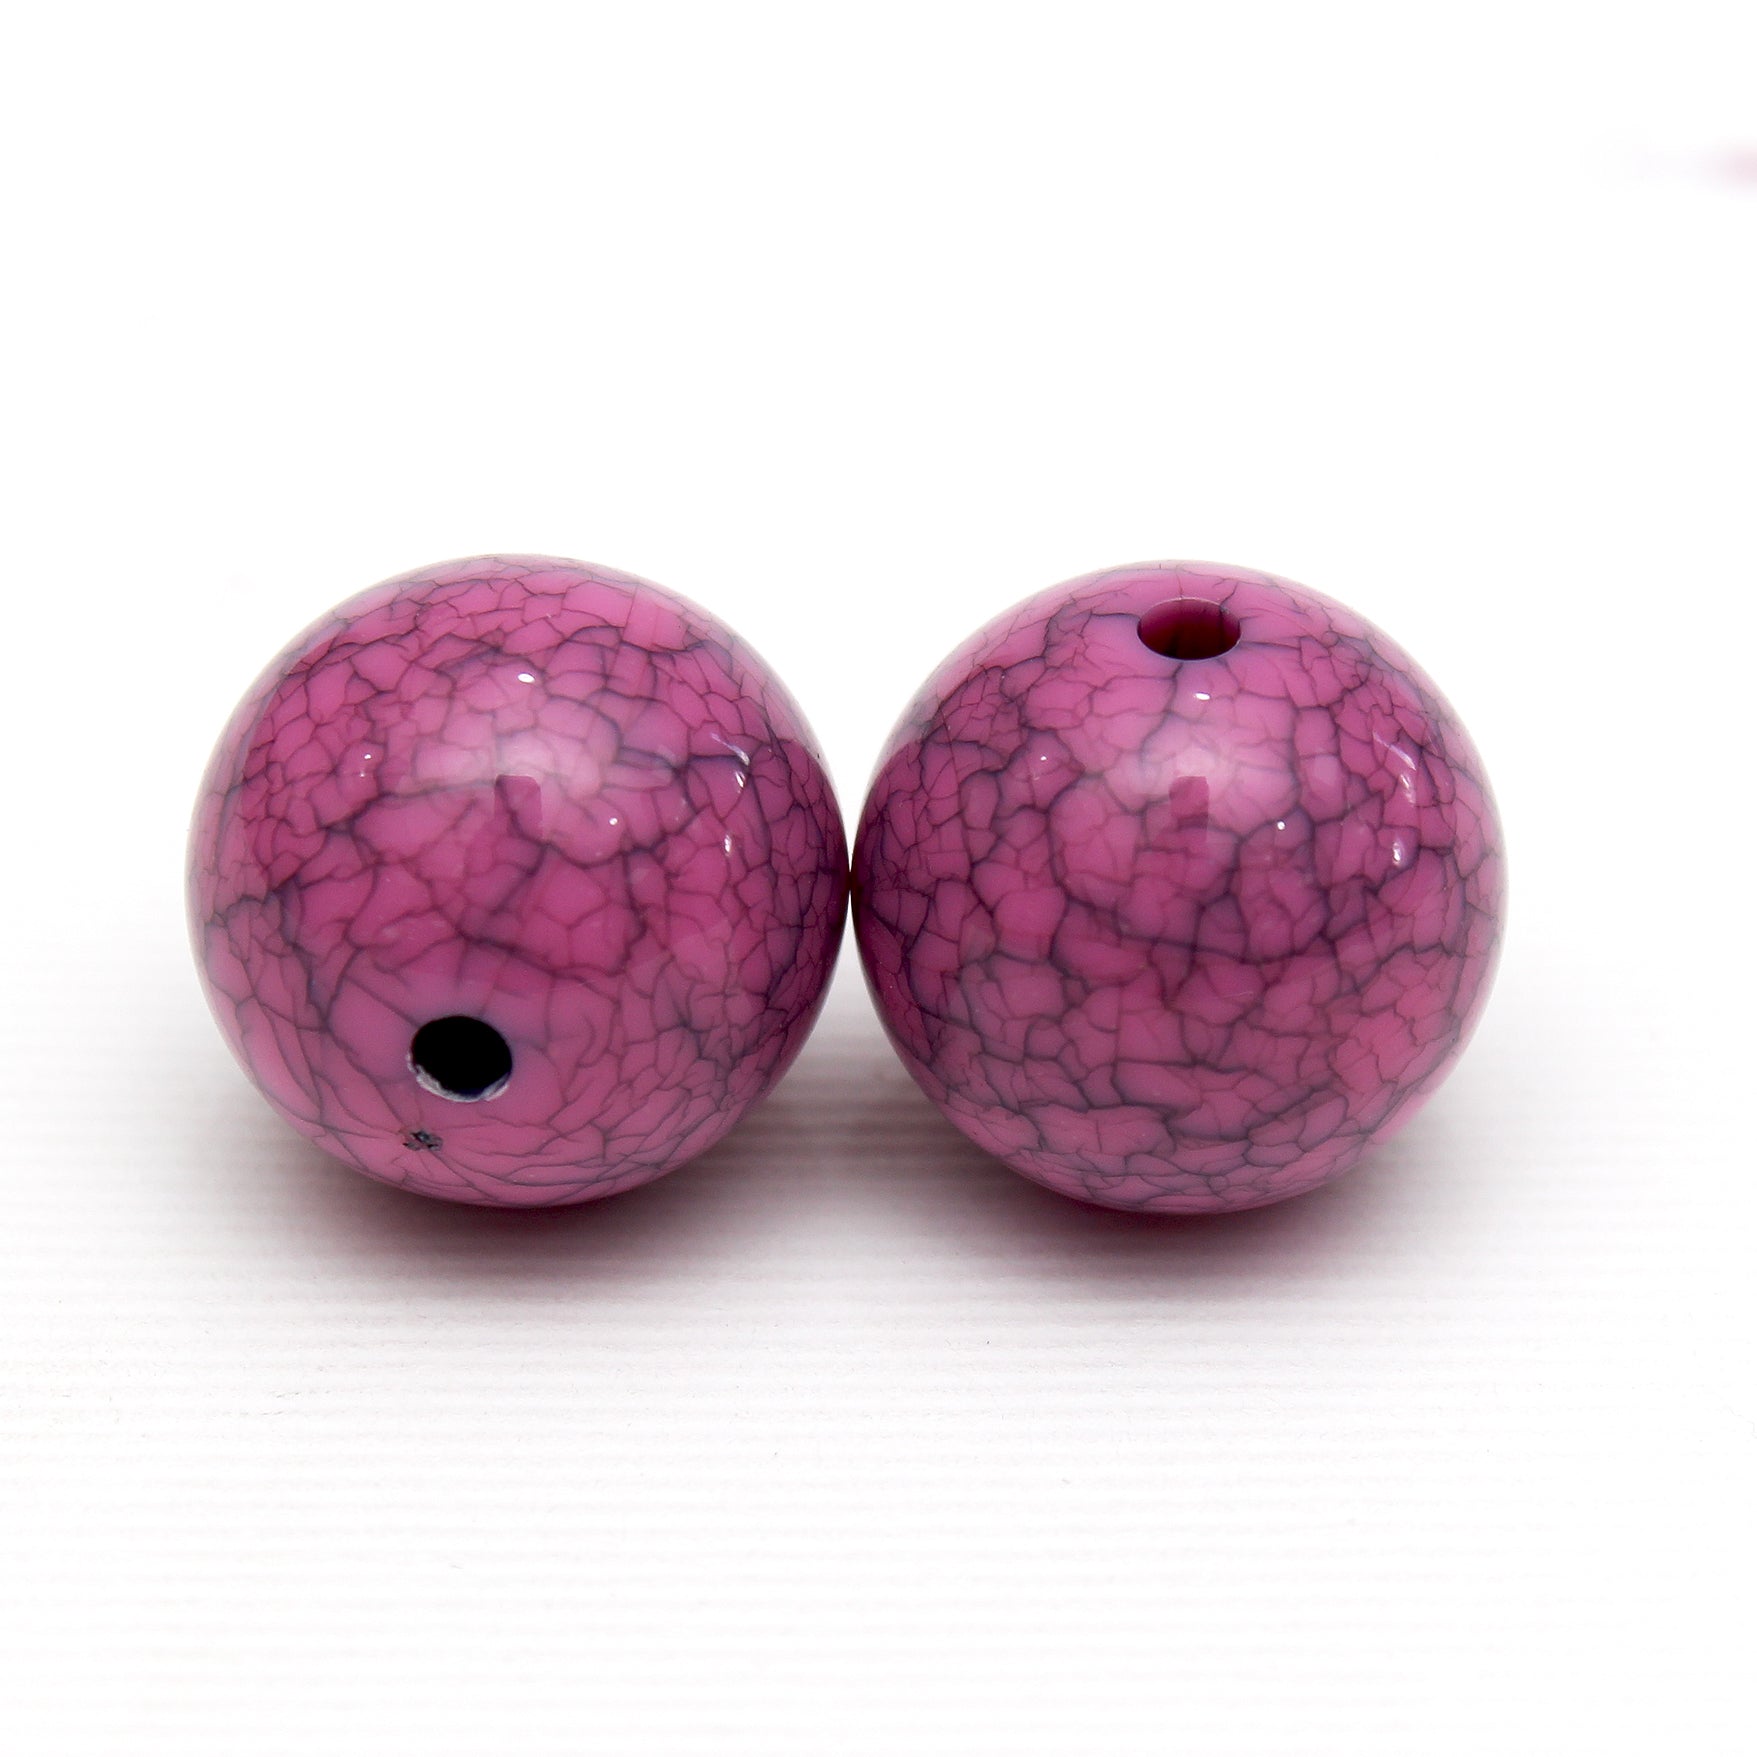 Beads Marbled Orchid Round 15Mm X 15Mm 30G Pb Ib